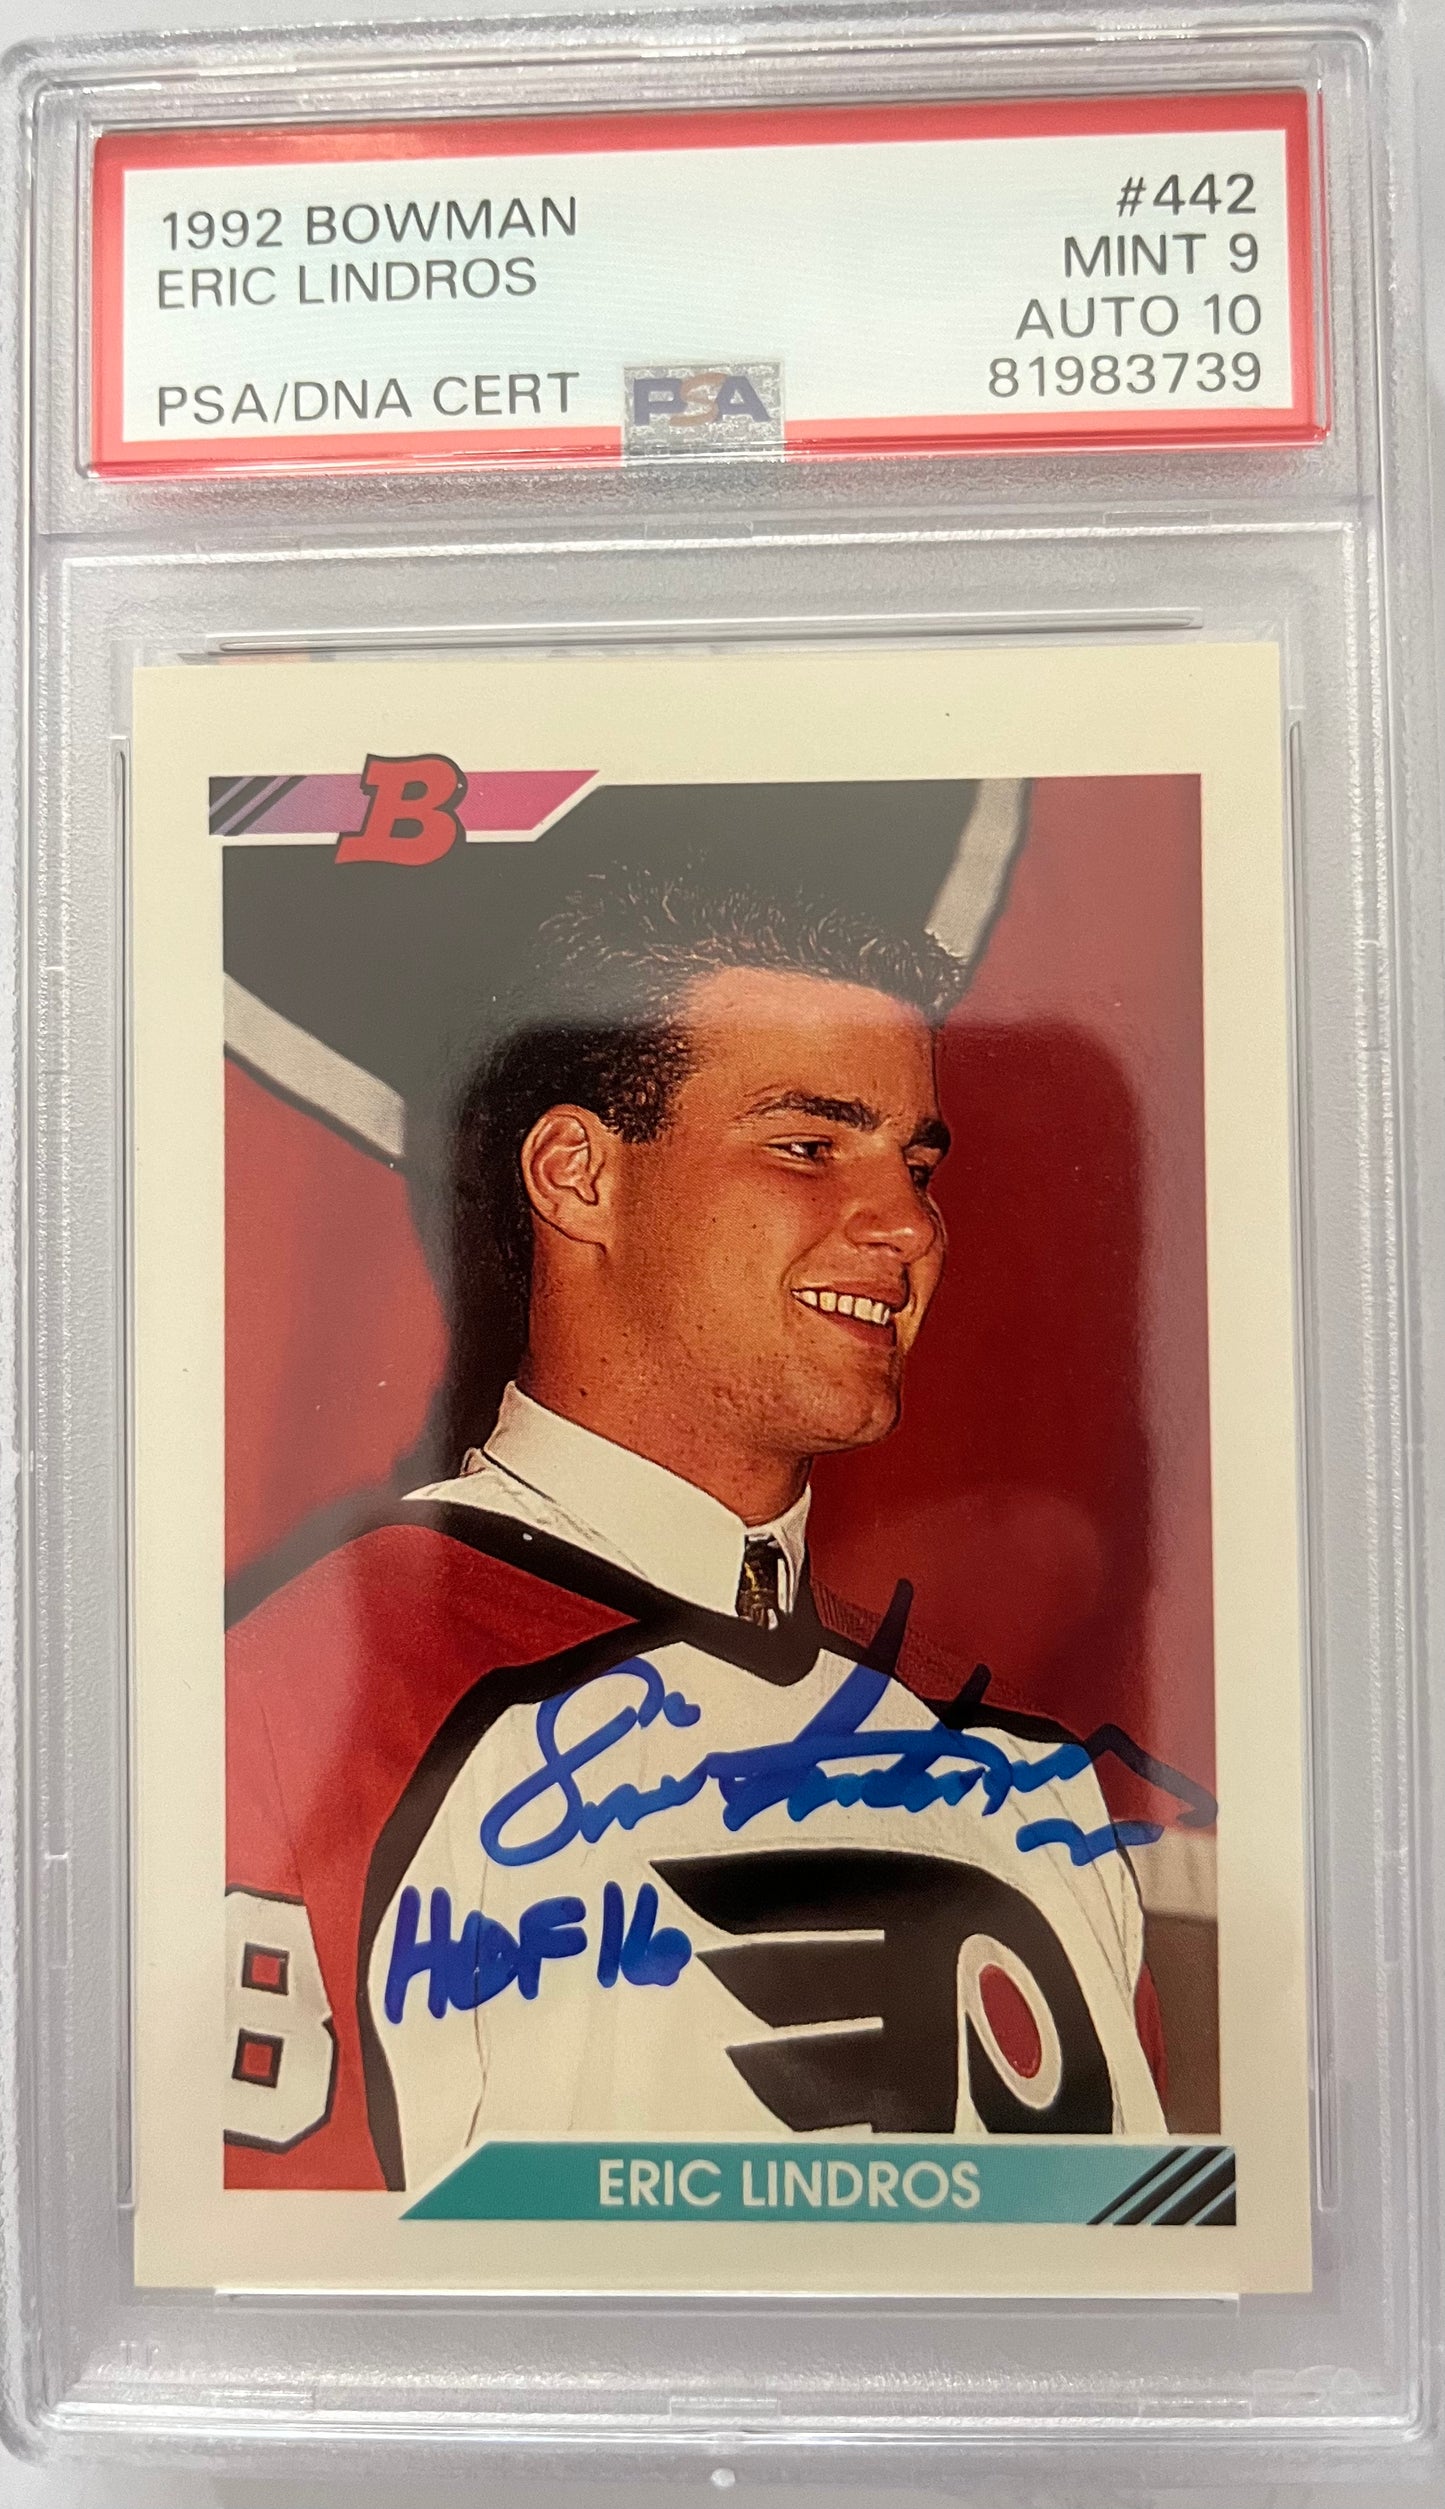 1992-93 Bowman ERIC LINDROS Rookie Card RC signed with HOF INS JSA PSA 10  POP 1